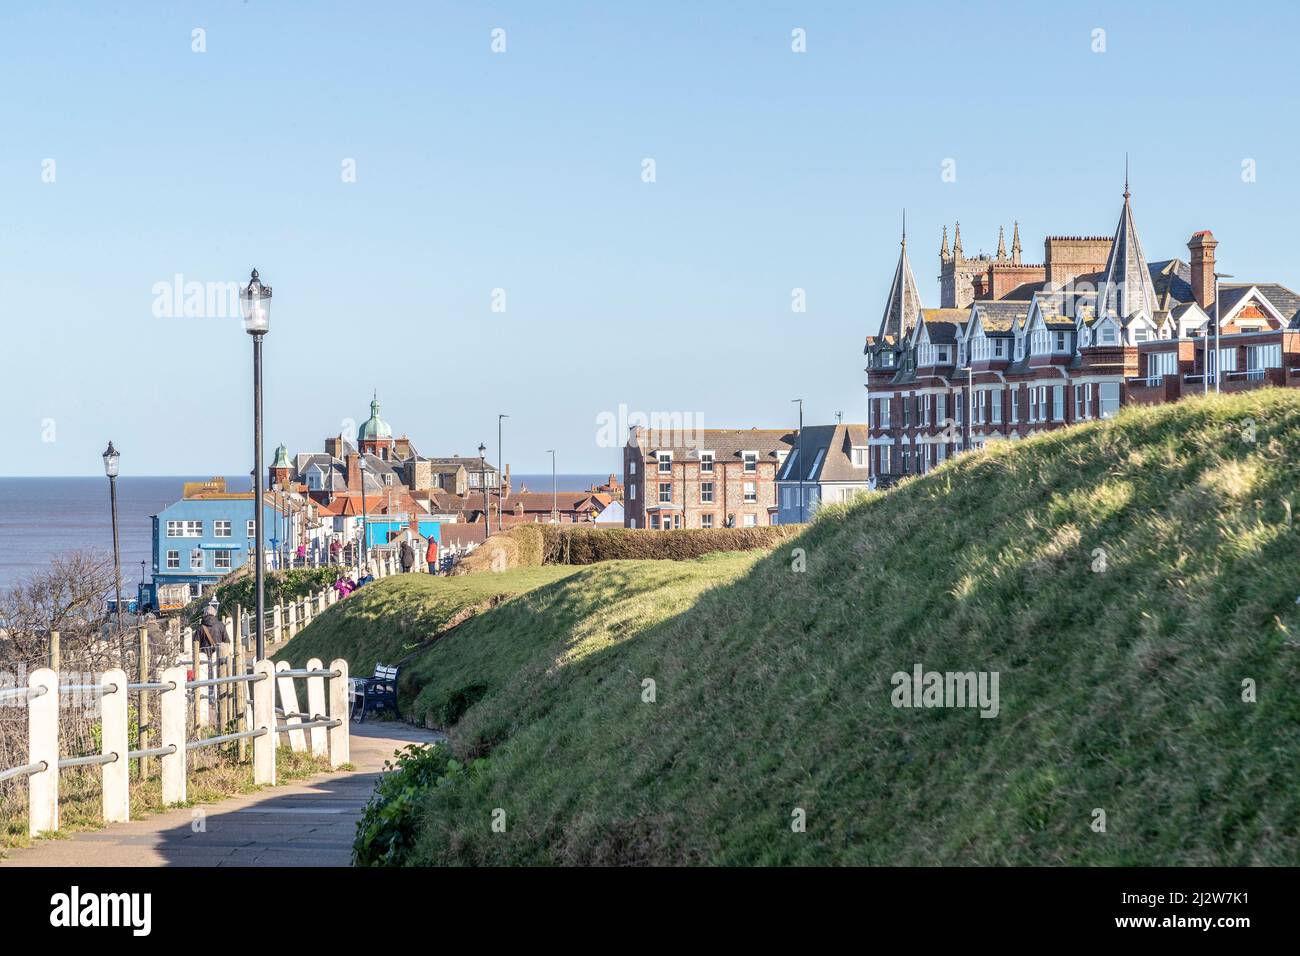 Cromer on the North Norfolk coast a popular staycation location. East Anglia, England, UK. Stock Photo